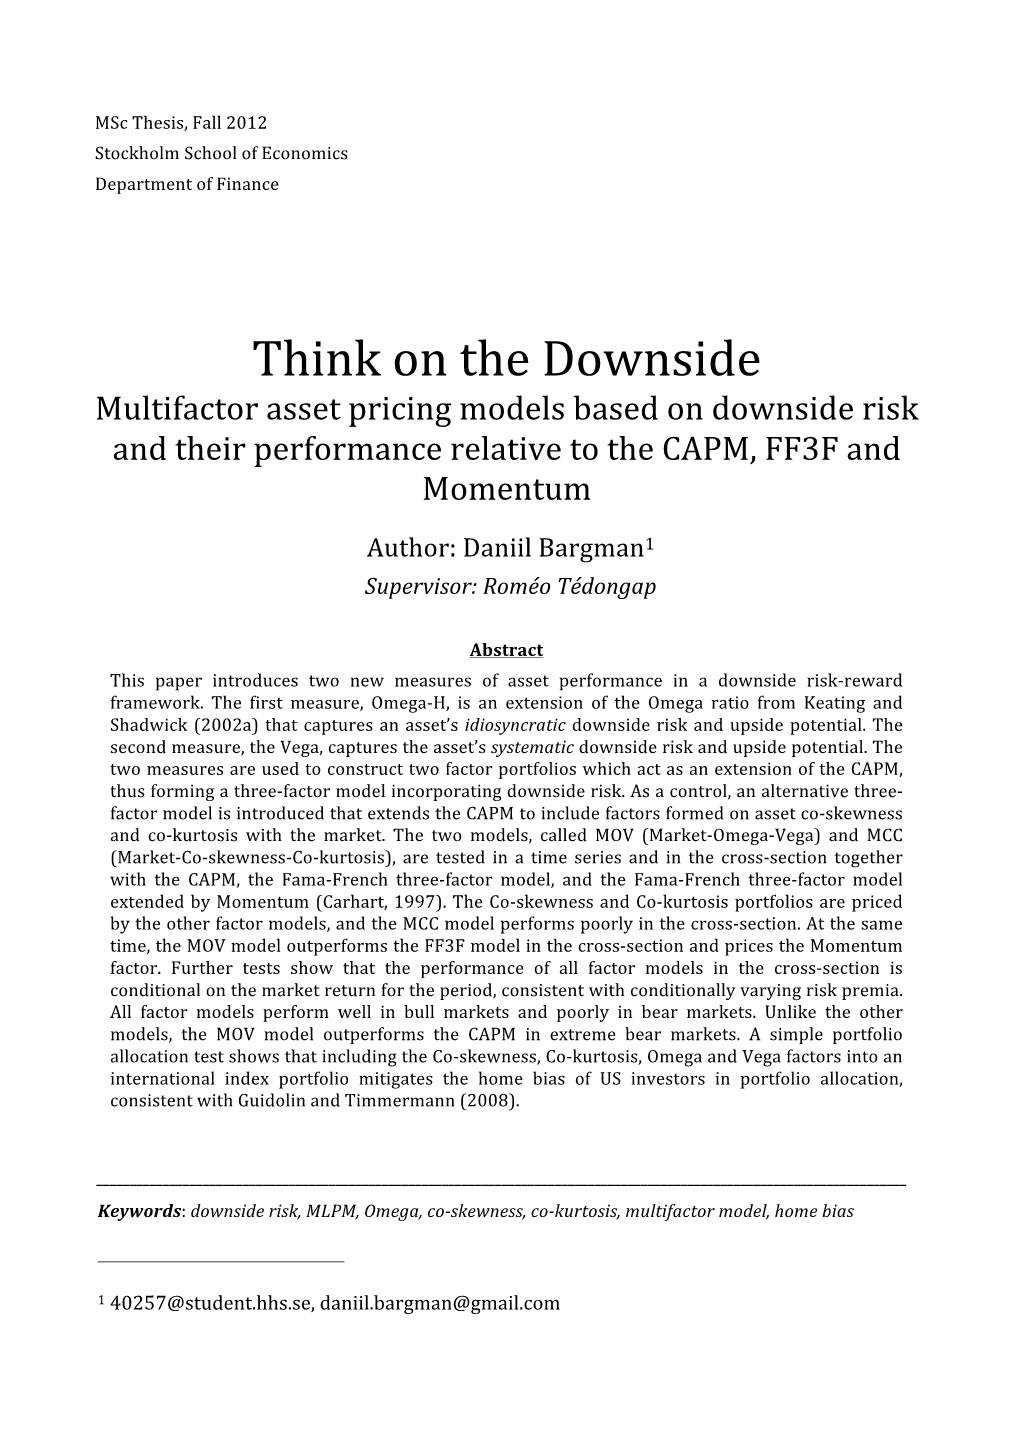 Think on the Downside Multifactor Asset Pricing Models Based on Downside Risk and Their Performance Relative to the CAPM, FF3F and Momentum